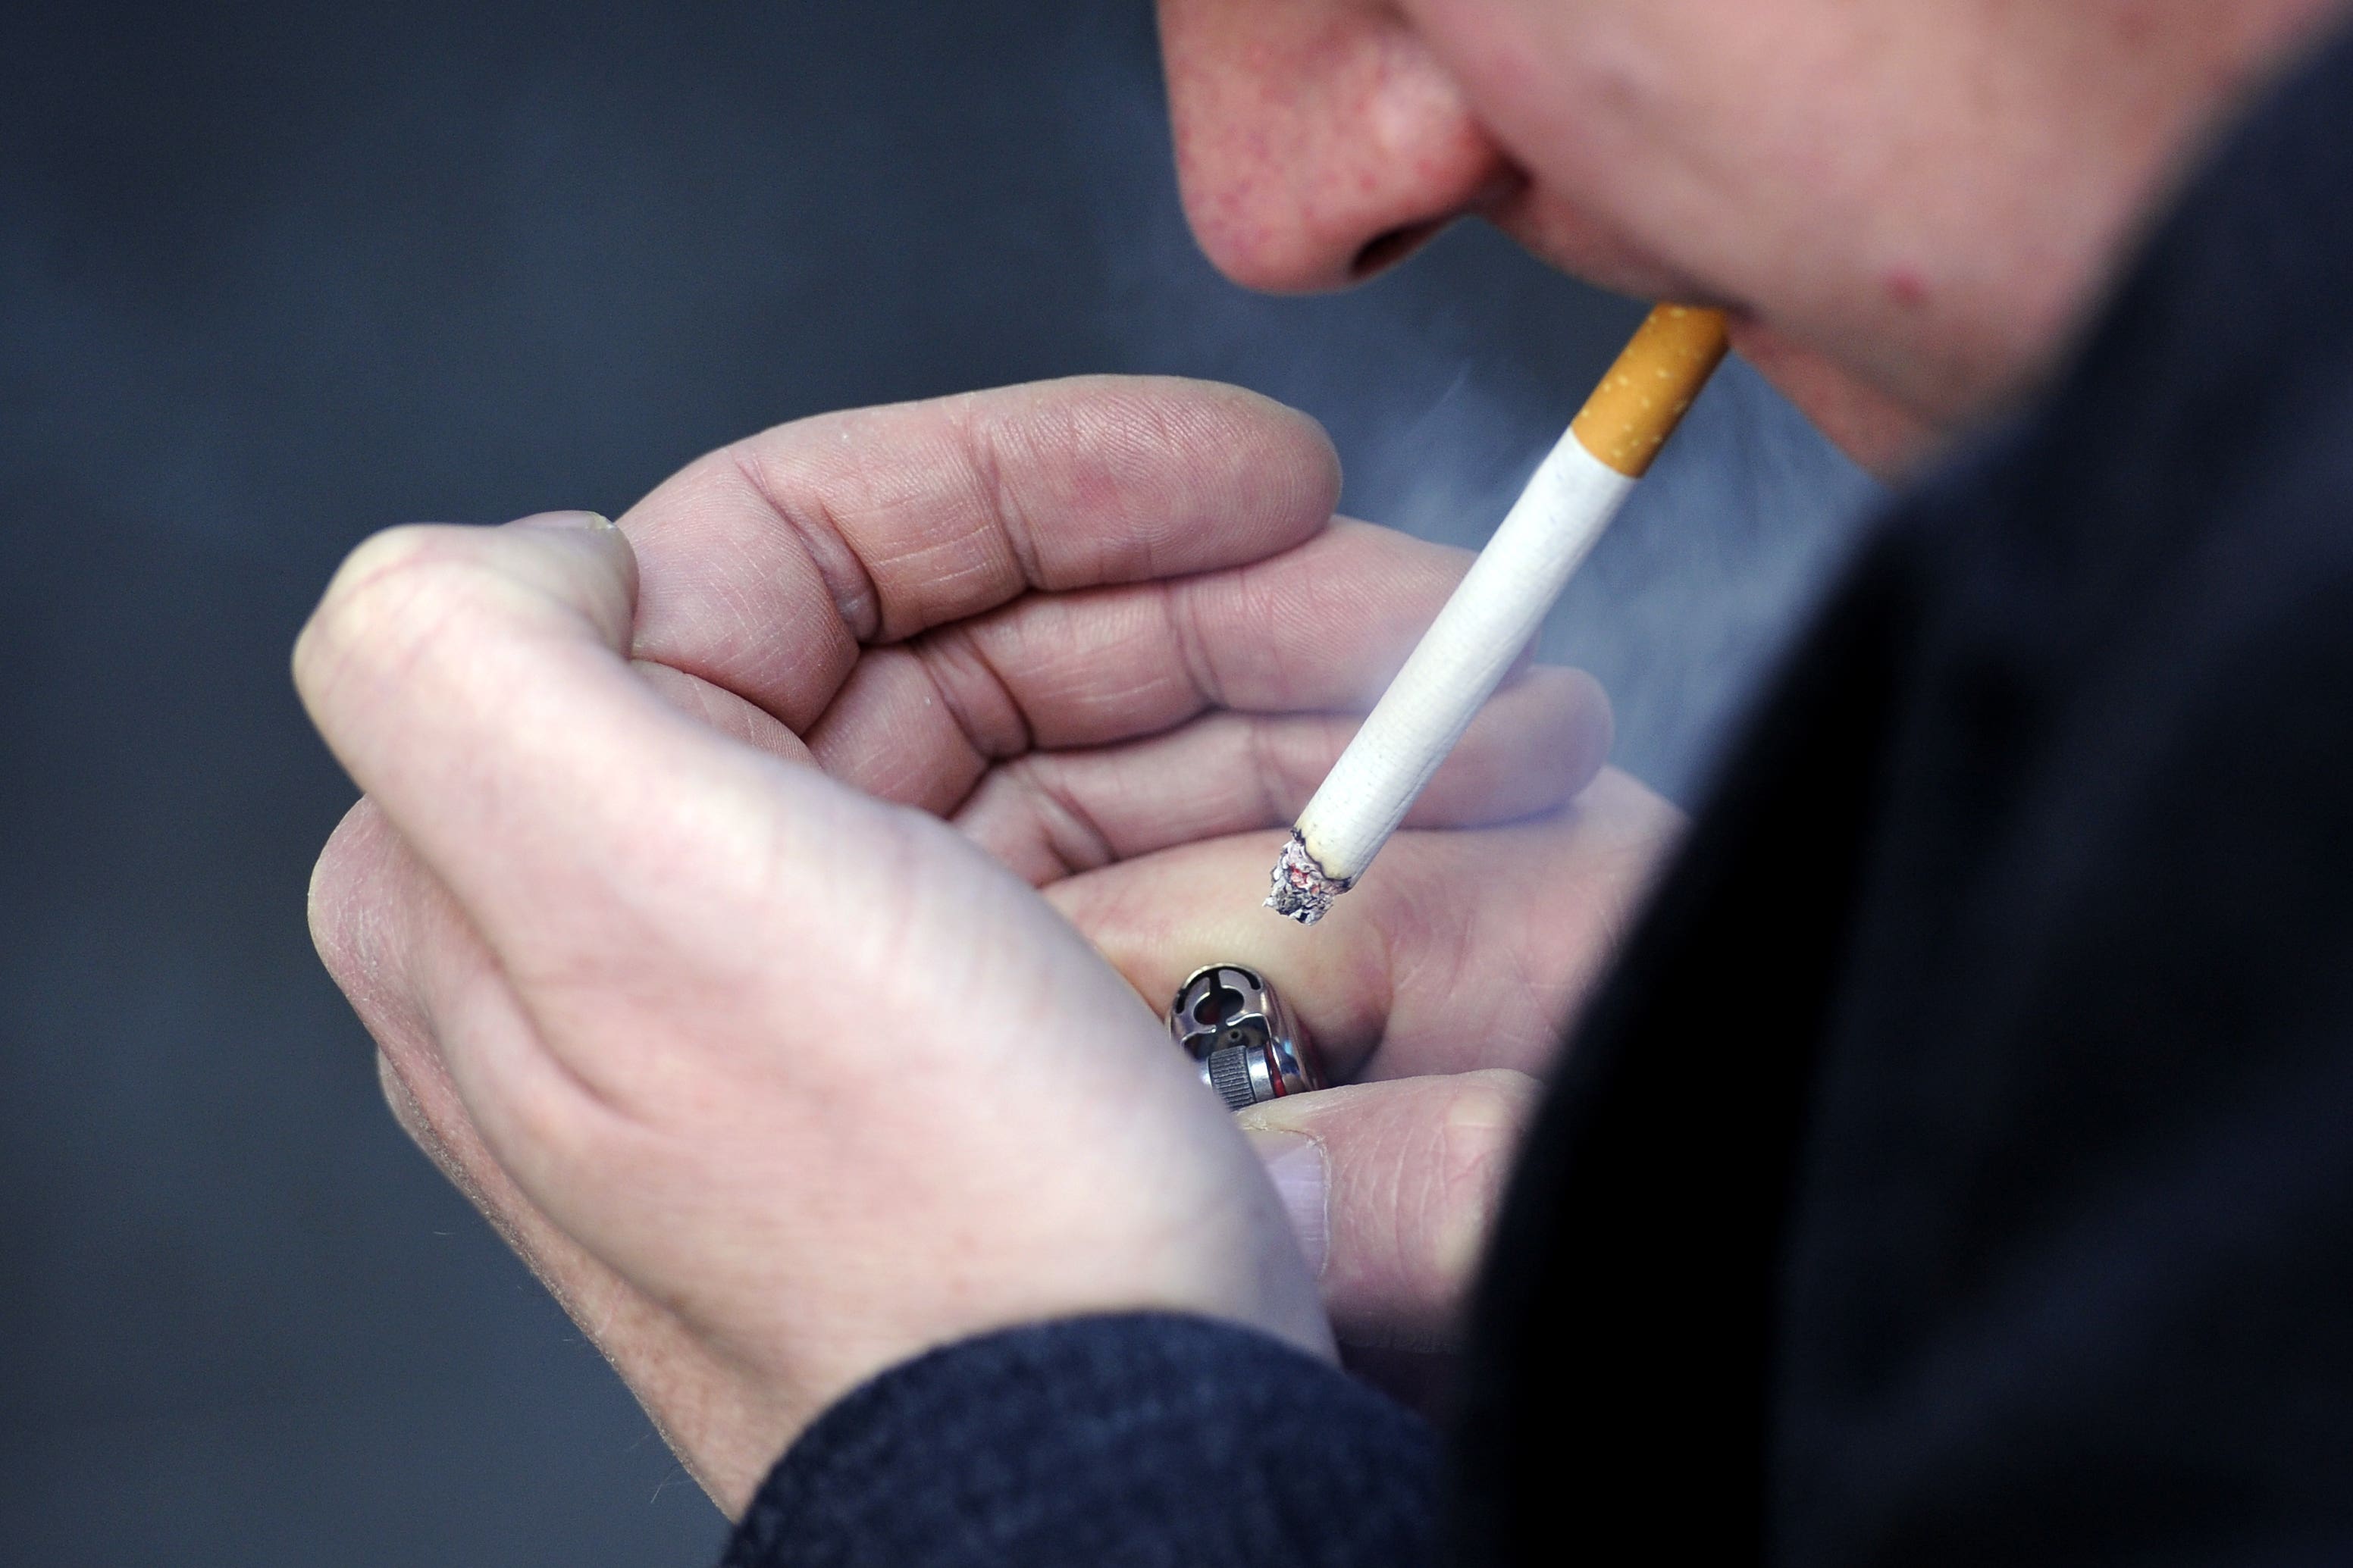 The latest official figures show tobacco prices surged by 16 per cent year on year last month